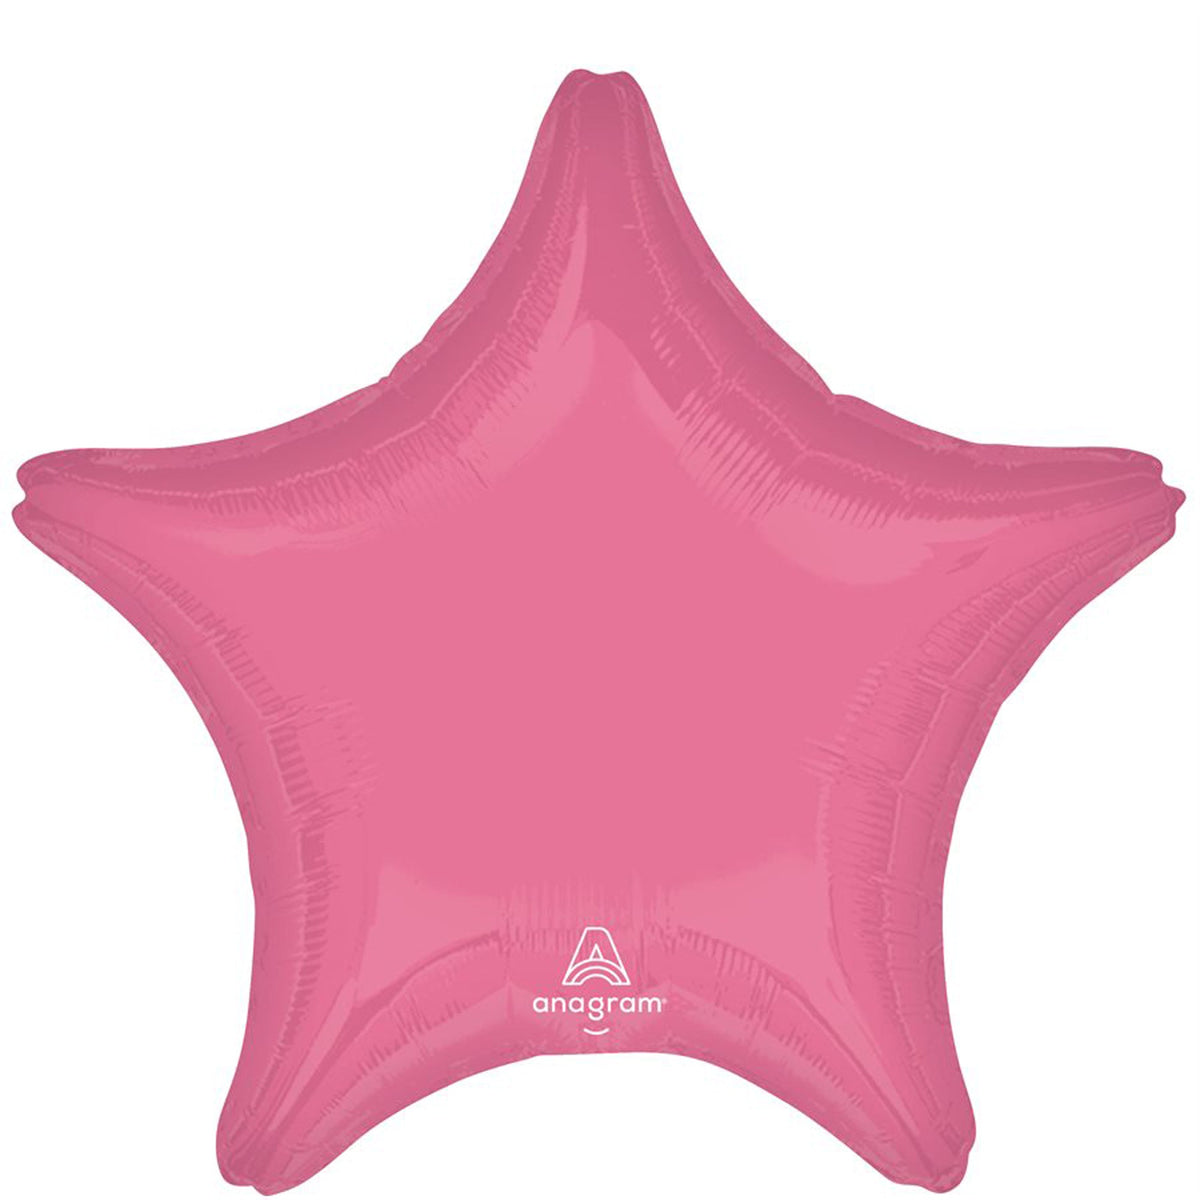 LE GROUPE BLC INTL INC Balloons Vibrant Pink Star Shaped Balloon, 18 Inches, 1 Count 026635471183